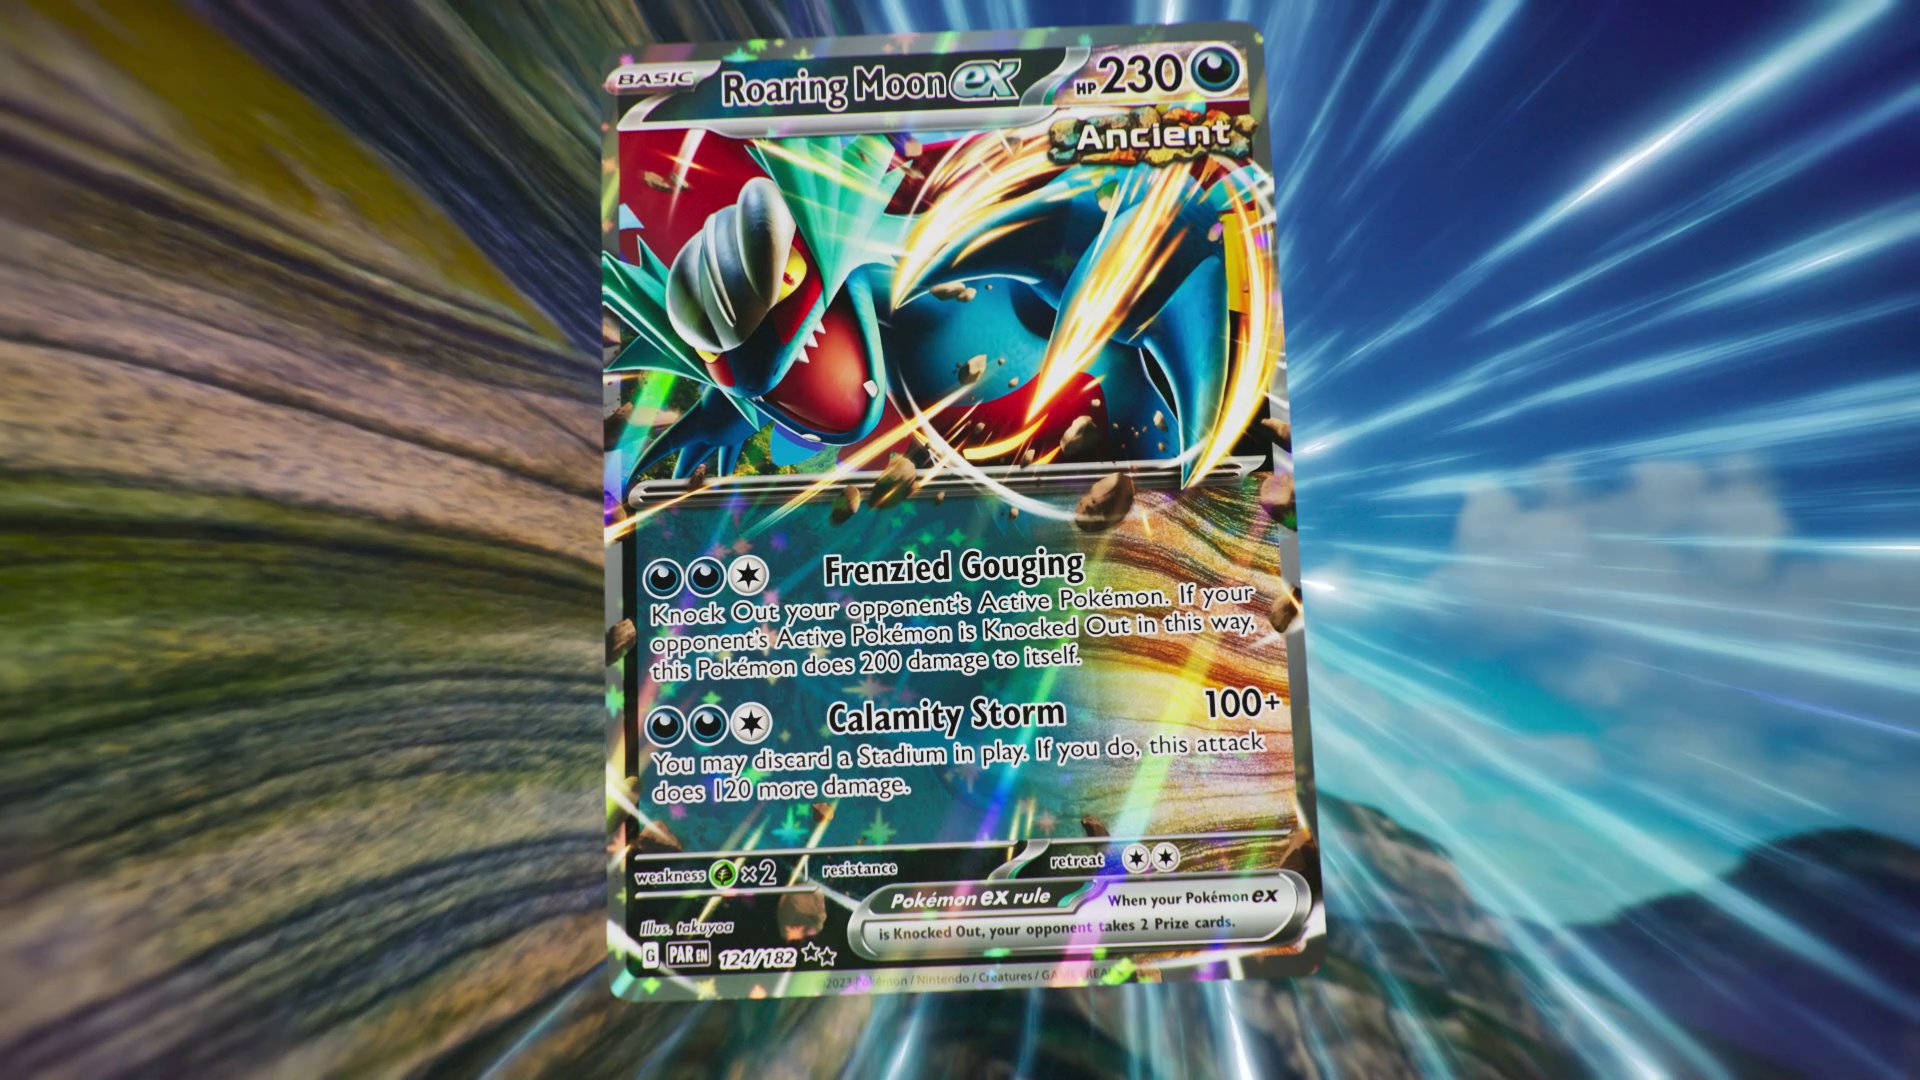 Fans are loving the new Pokemon in the upcoming TCG set - Xfire